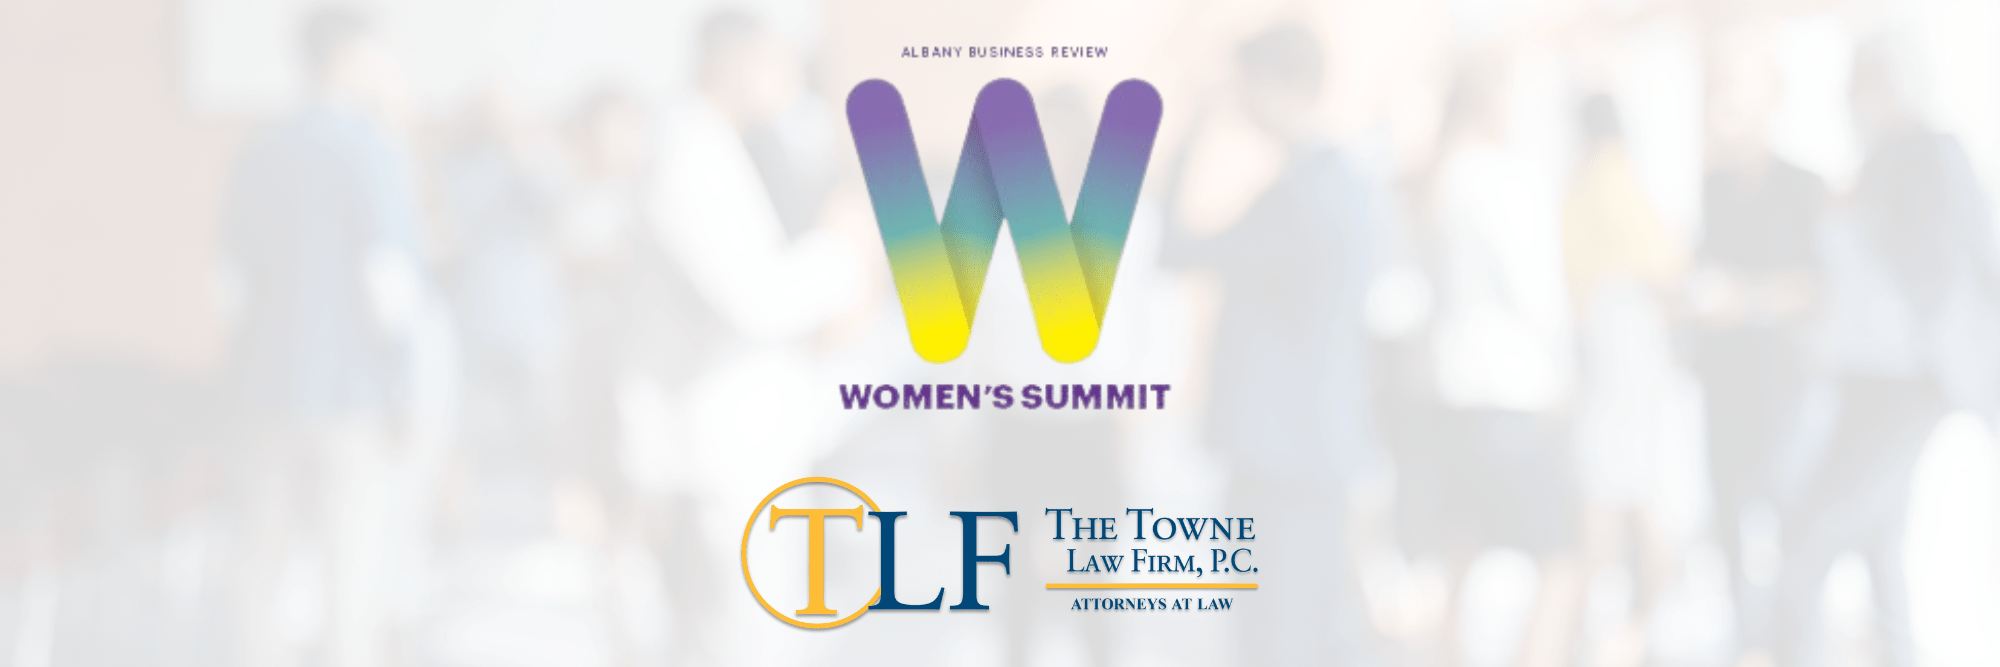 Albany Business Review's Women's summit Logo and The Towne Law Firm's Logo